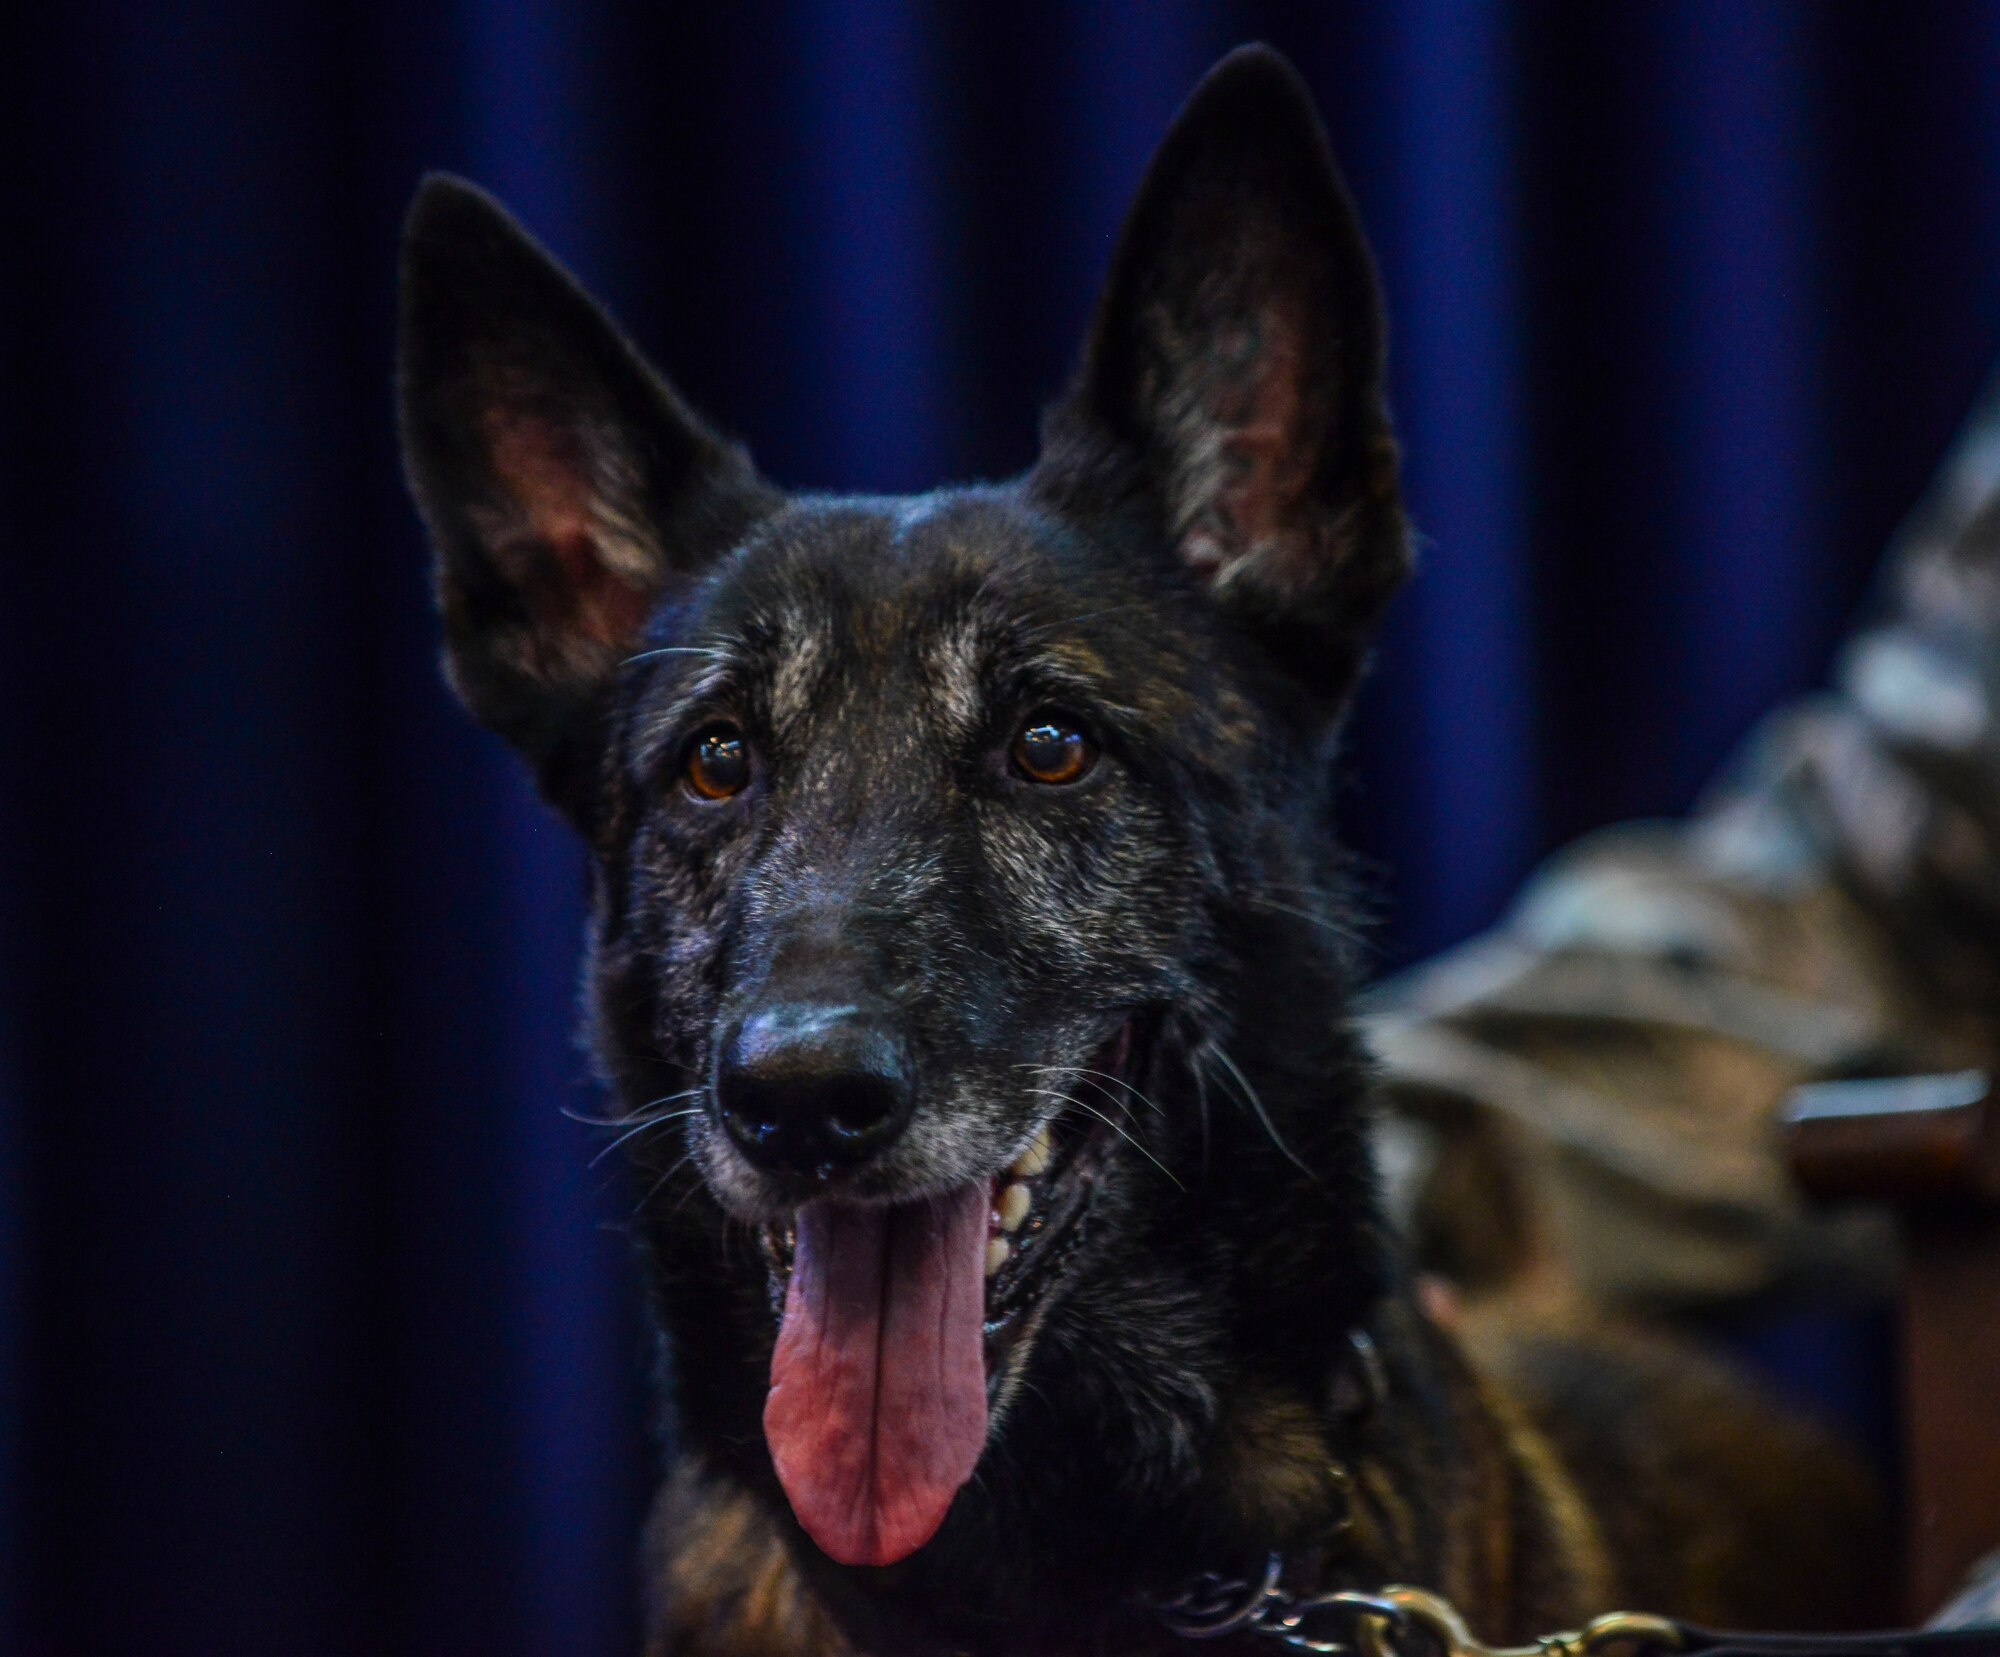 Kira, 39th Security Forces Squadron military working dog, stands on stage during her retirement ceremony Oct. 27, 2014, Incirlik Air Base, Turkey.  Military working dogs play a vital role in the safety and security of all personnel at Incirlik Air Base. (U.S. Air Force photo by Senior Airman Nicole Sikorski/Released)